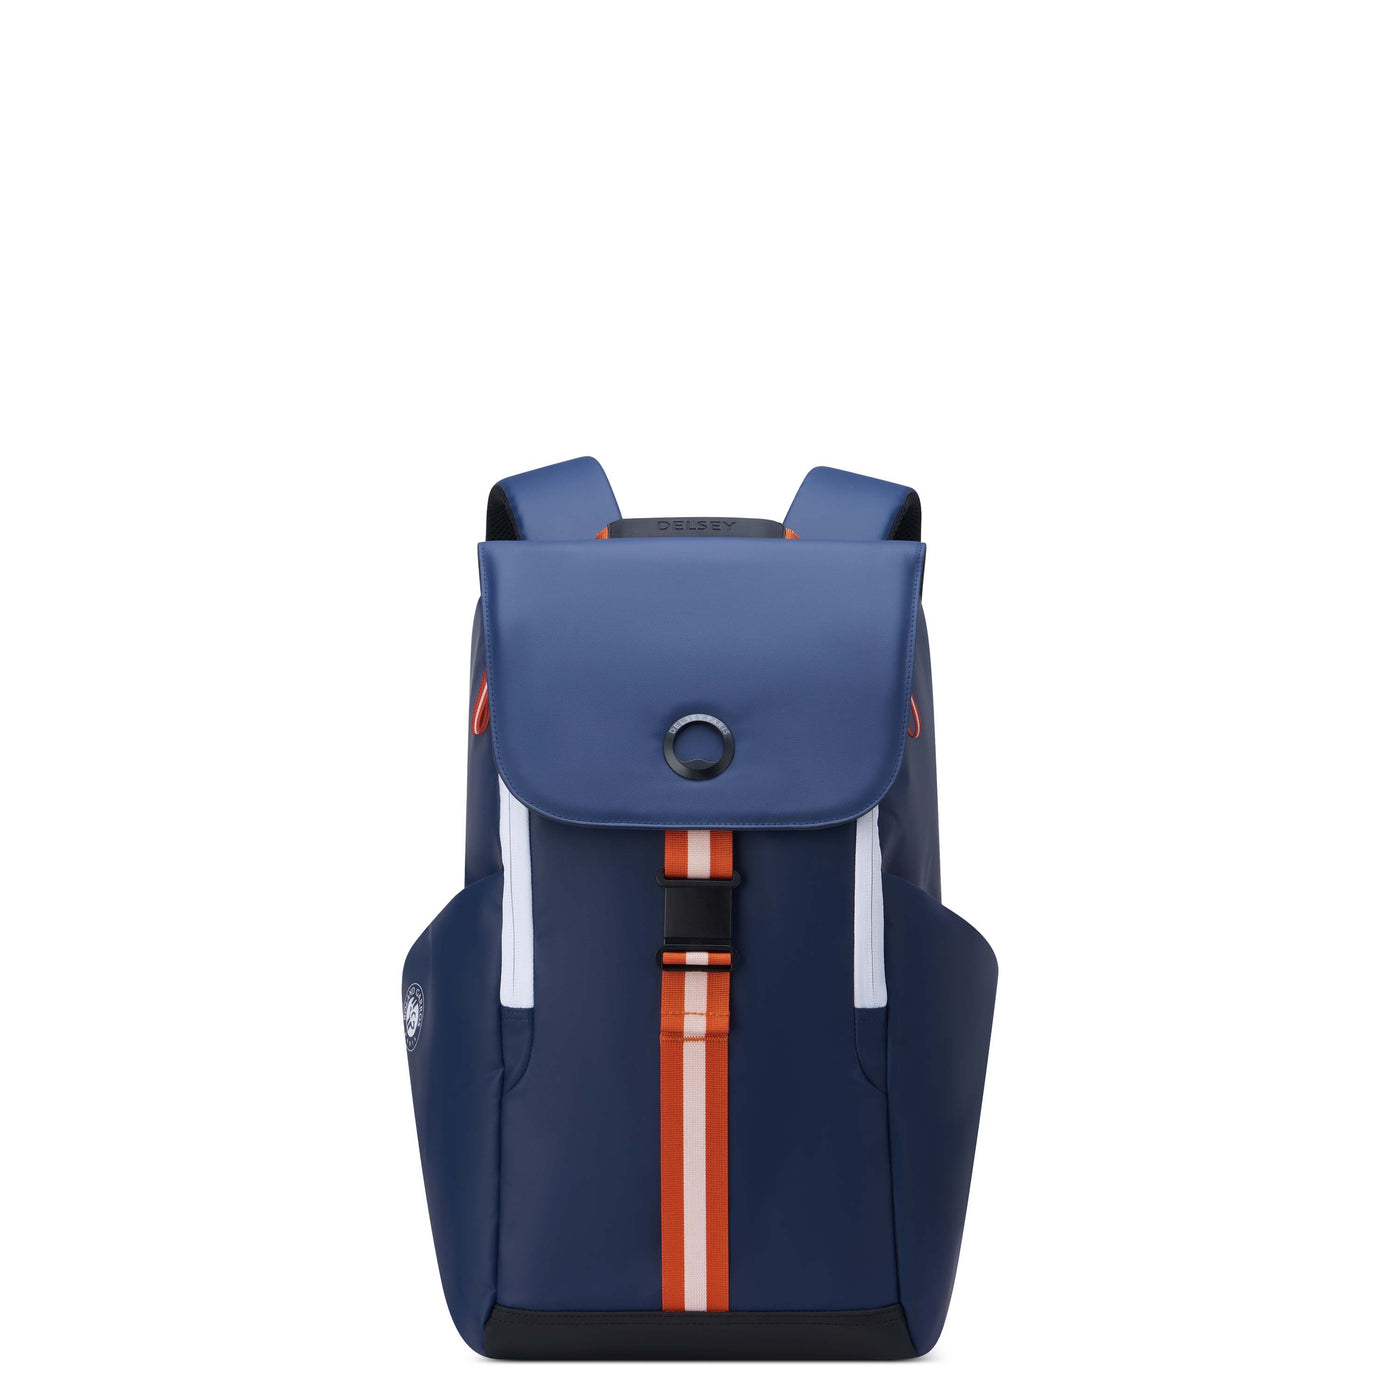 Shop The Latest Collection Of Delsey Securflap Backpack 16" In Lebanon